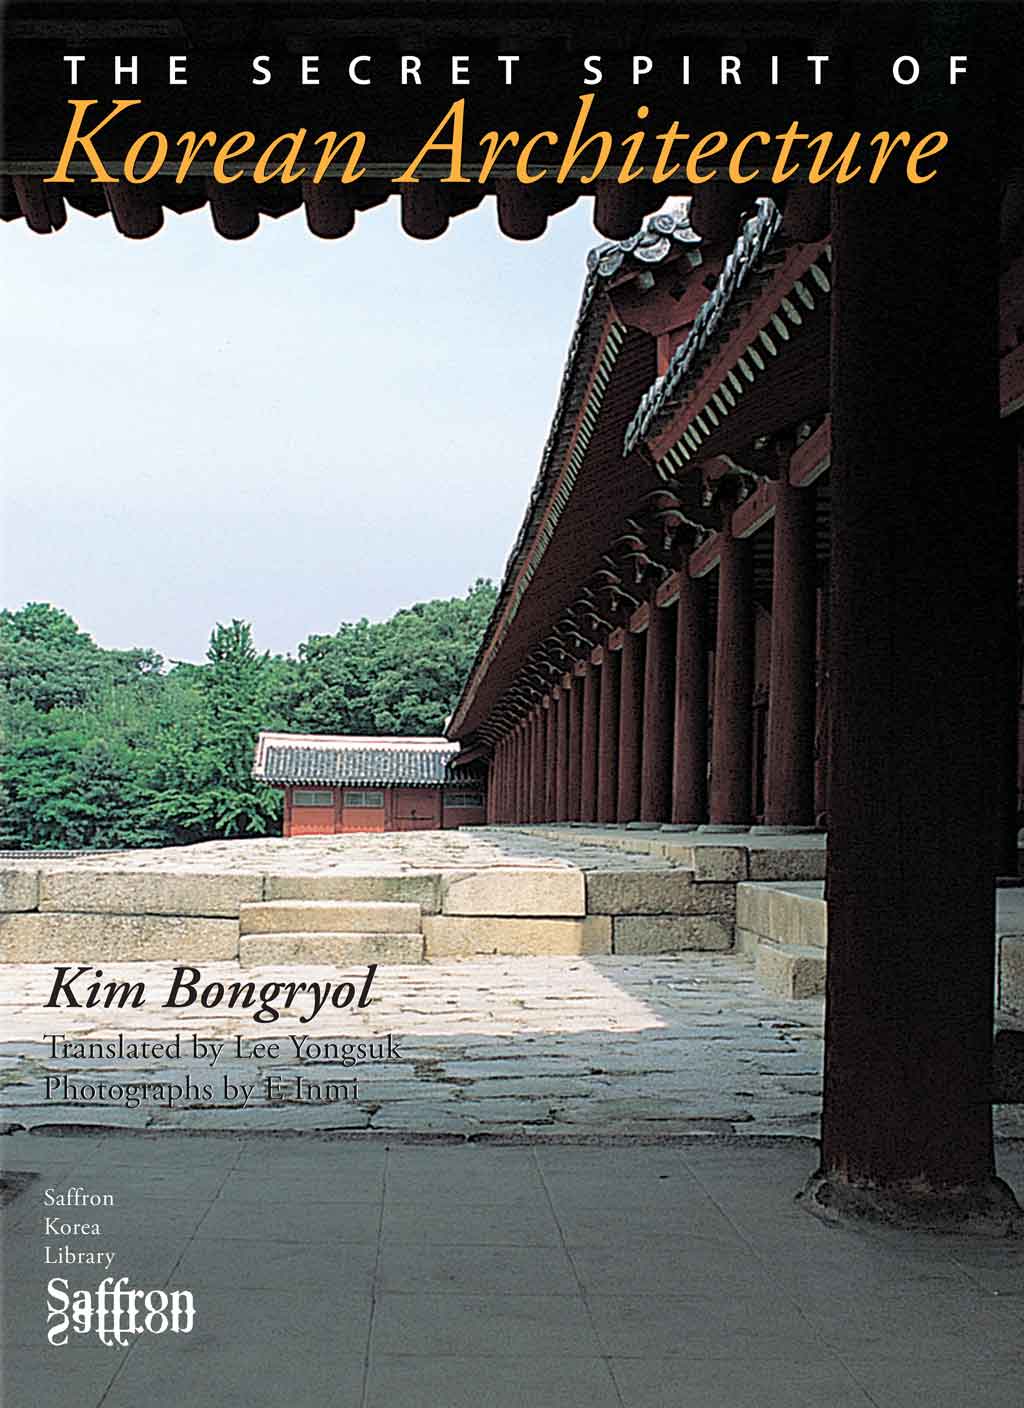 The Secret Spirit of Korean Architecture, by Kim Bongryol, is the first English-language distillation of Kim Bongryol's ideas on Korean architecture, as a whole and in its various manifestations, and architecture's role in the history of Korea. From the time of its original Korean publication the book has been widely seen as a response to the growing international interest in Korean architecture, its tangible historical and contemporary forms, and a multidisciplinary contribution to the discourse that has resulted in new writing and audiovisual output exploring principal features and themes, materials, techniques and methodologies particular to the genre. This revised and updated English version of Kim Bongryol's original three-volume book was published in two editions, hard cover [9781872843827] and soft cover [9781872843834], as part of Saffron Korea Library Series [ISSN 1748-0477].